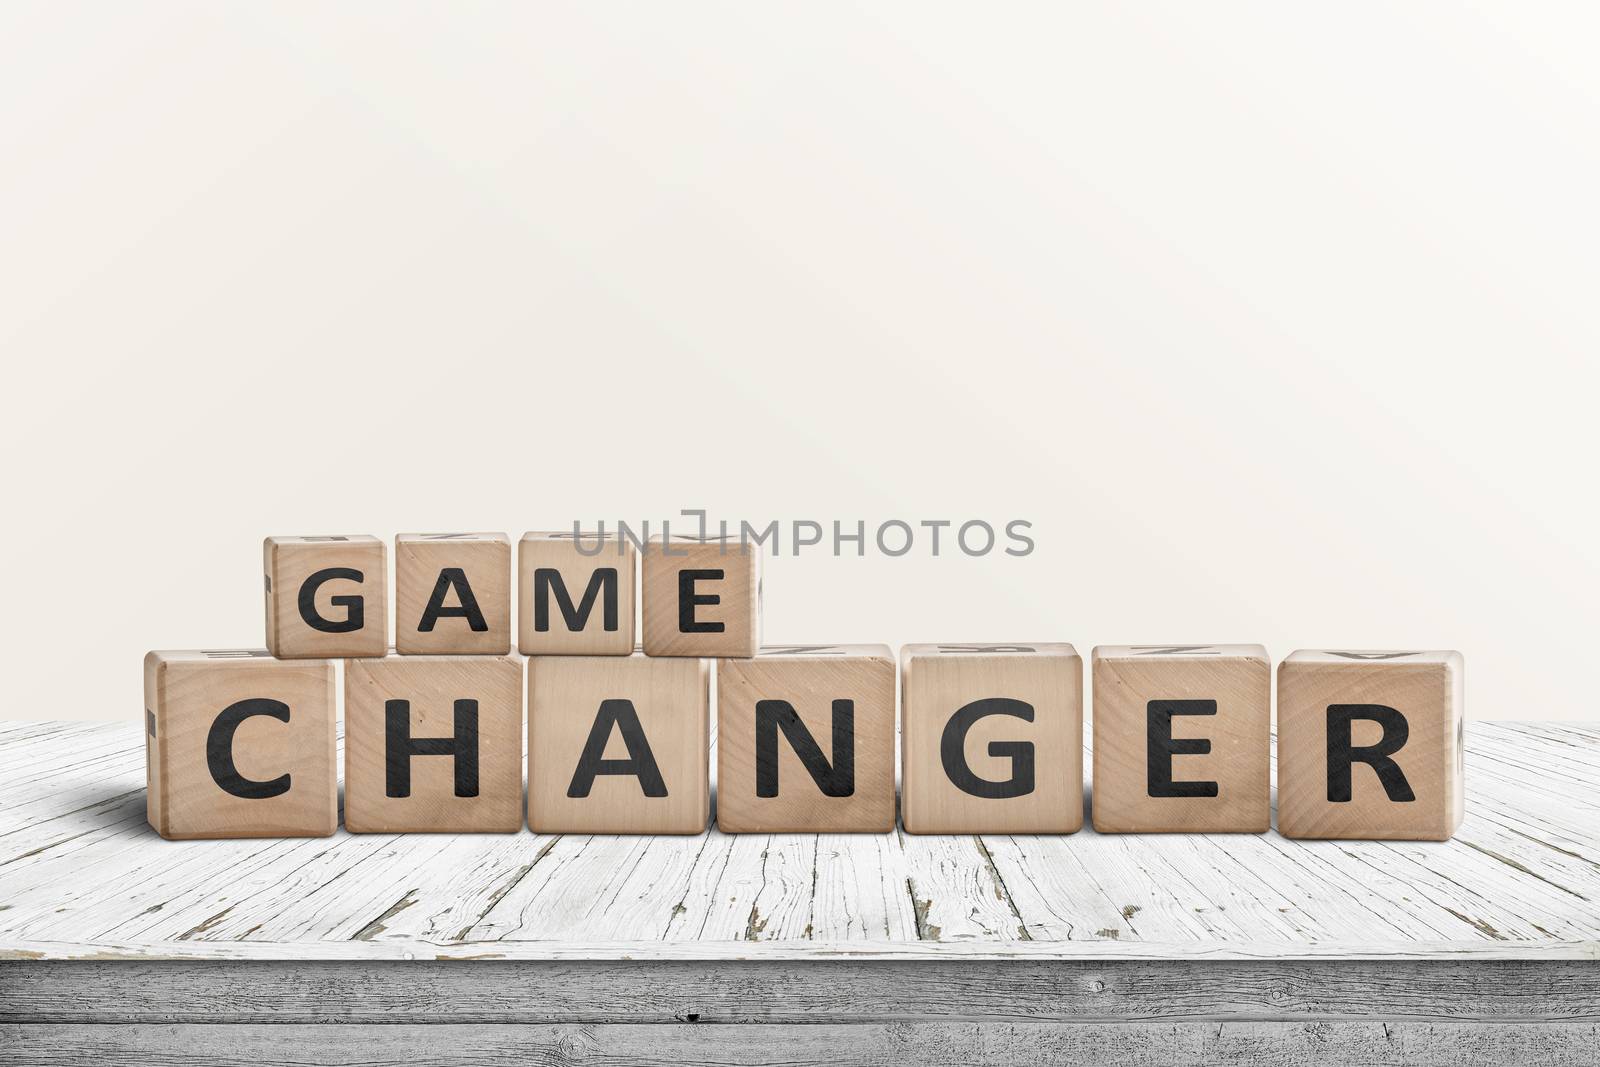 Game changer sign made of wooden blocks by Sportactive